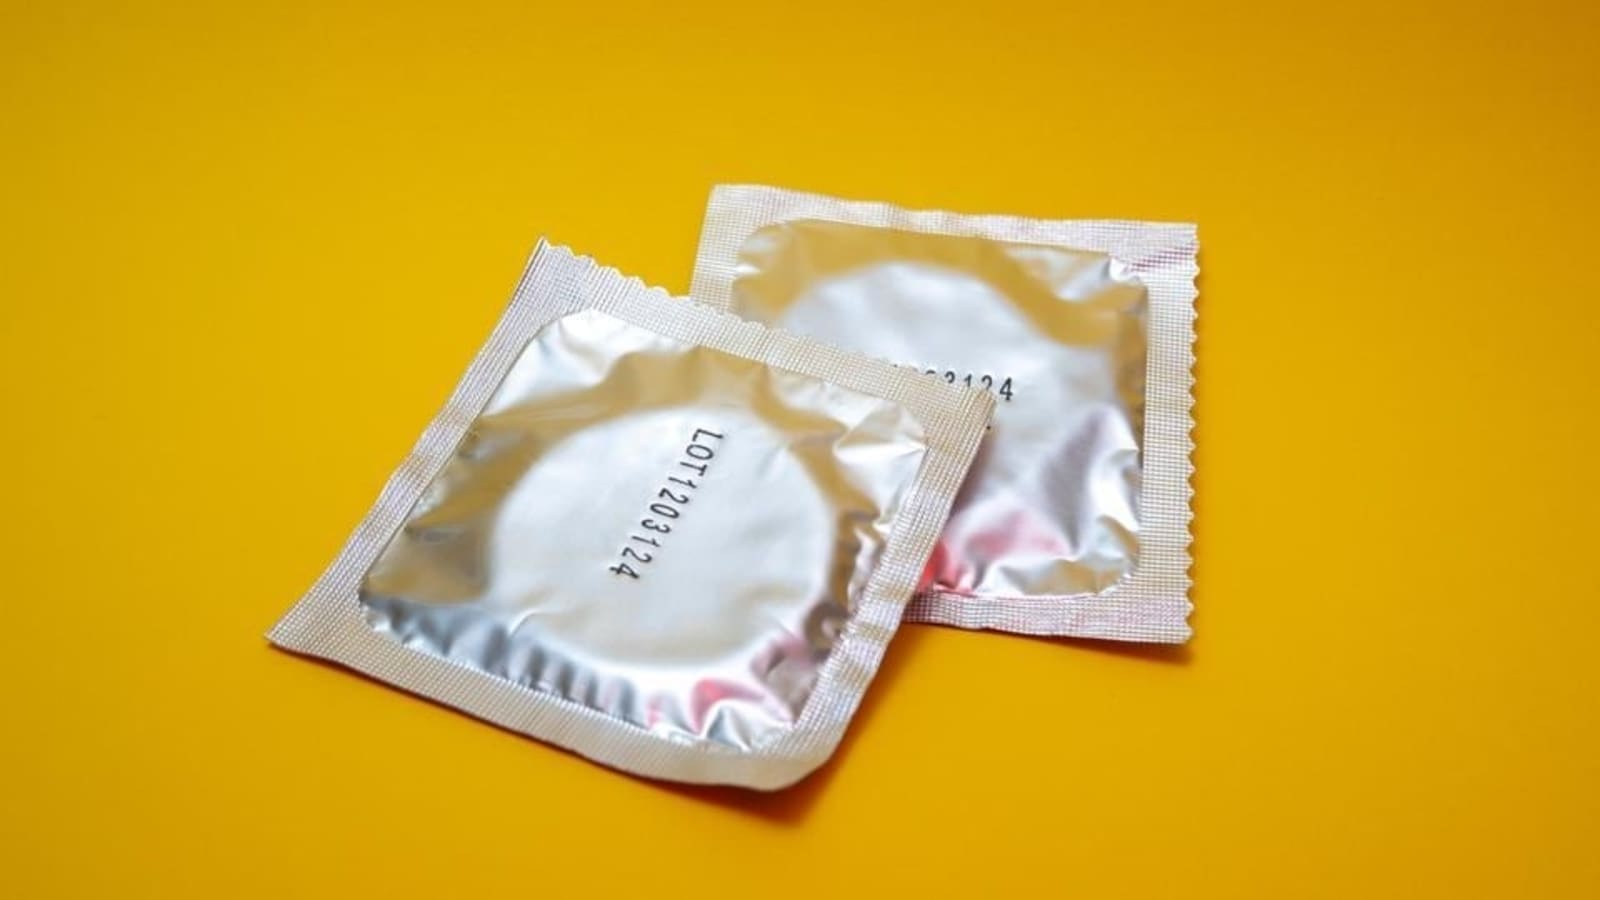 Ahead of Valentine’s Day, this Asian country to distribute 95 million condoms